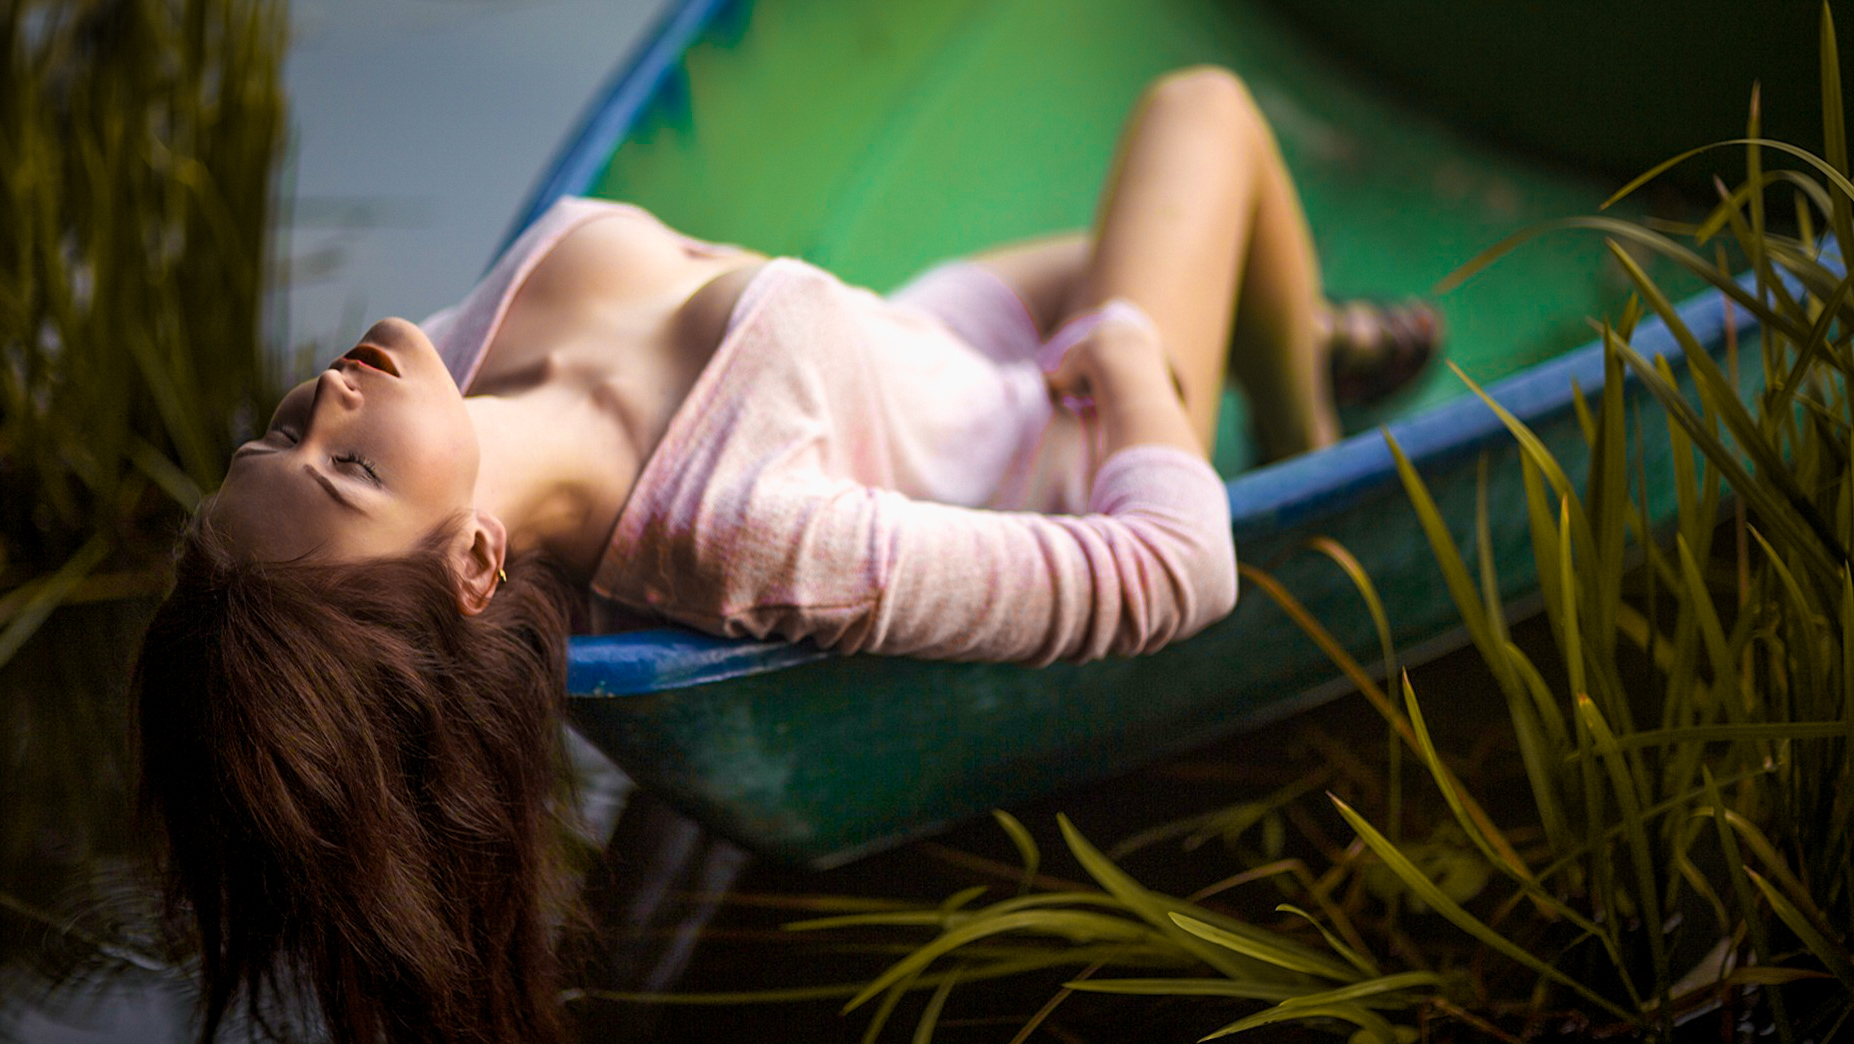 People 1854x1044 women outdoors closed eyes pink shirt no bra brunette collarbone perky breasts earring grass side view hair hanging down model chin up women lying on back cleavage peeking